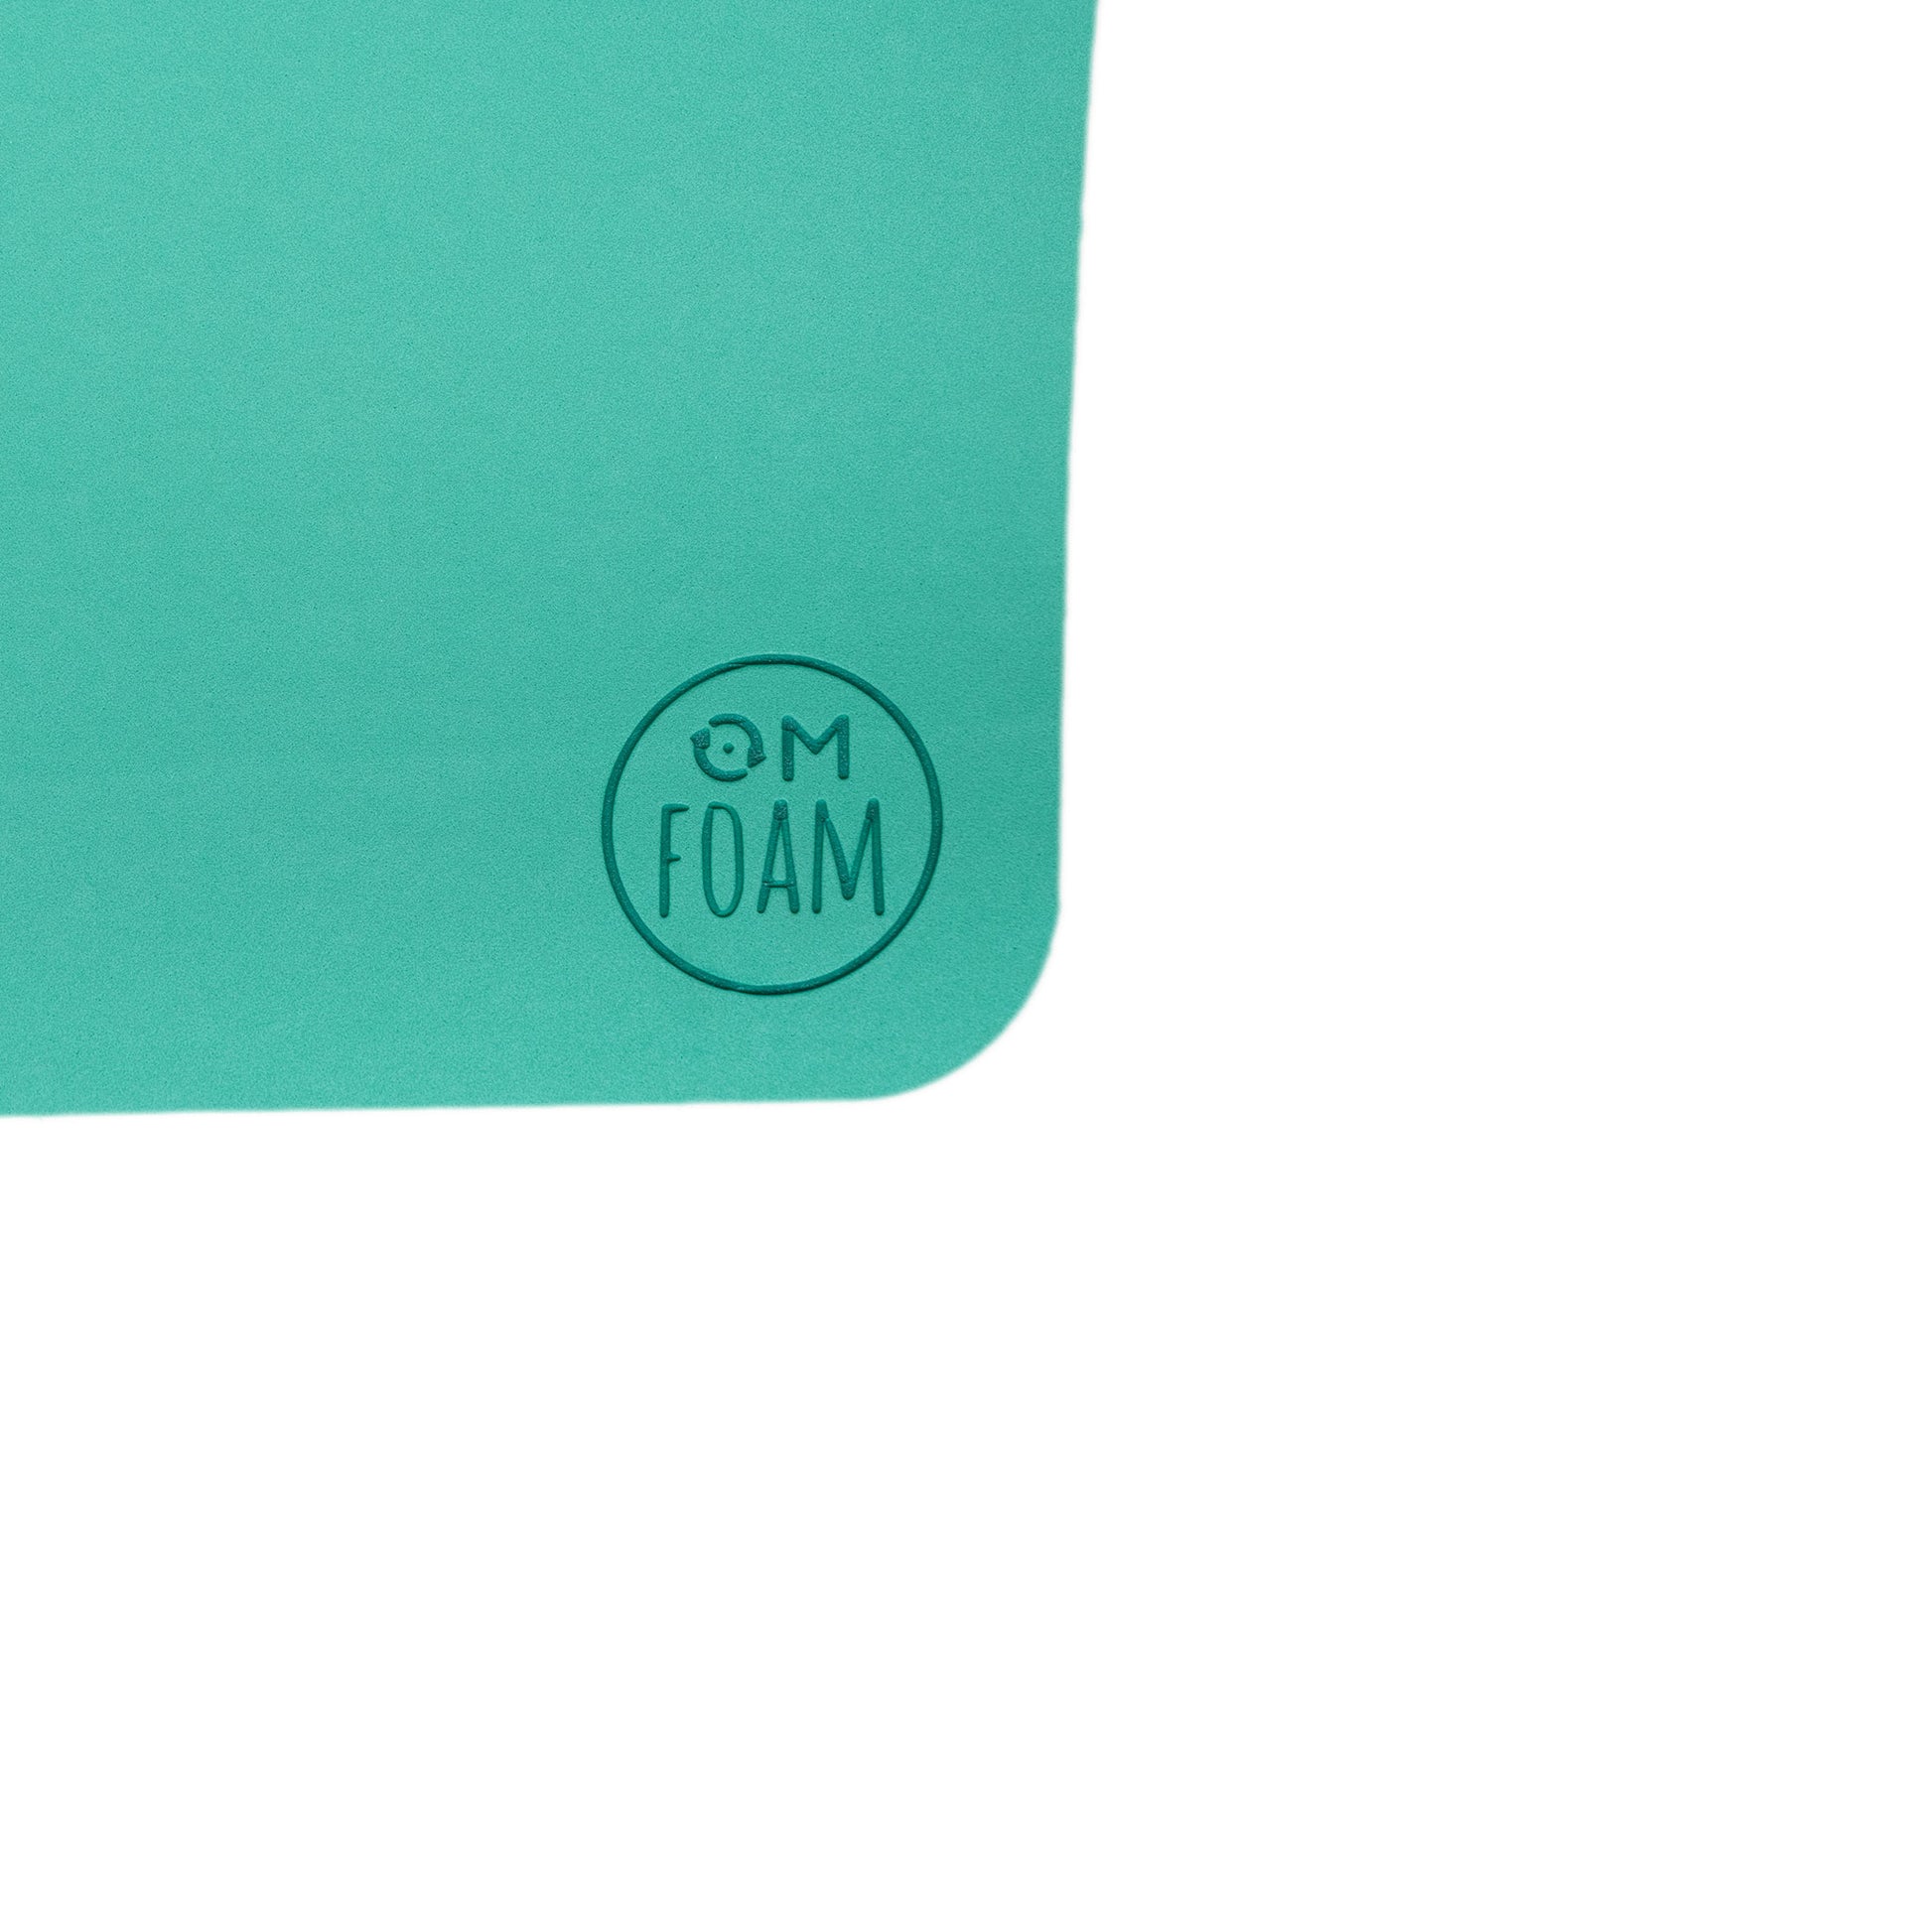 NEW!! alerse LIGHT Yoga Mat - Premium 6mm thick, 2.5lbs. - Tulum (Teal  Color)